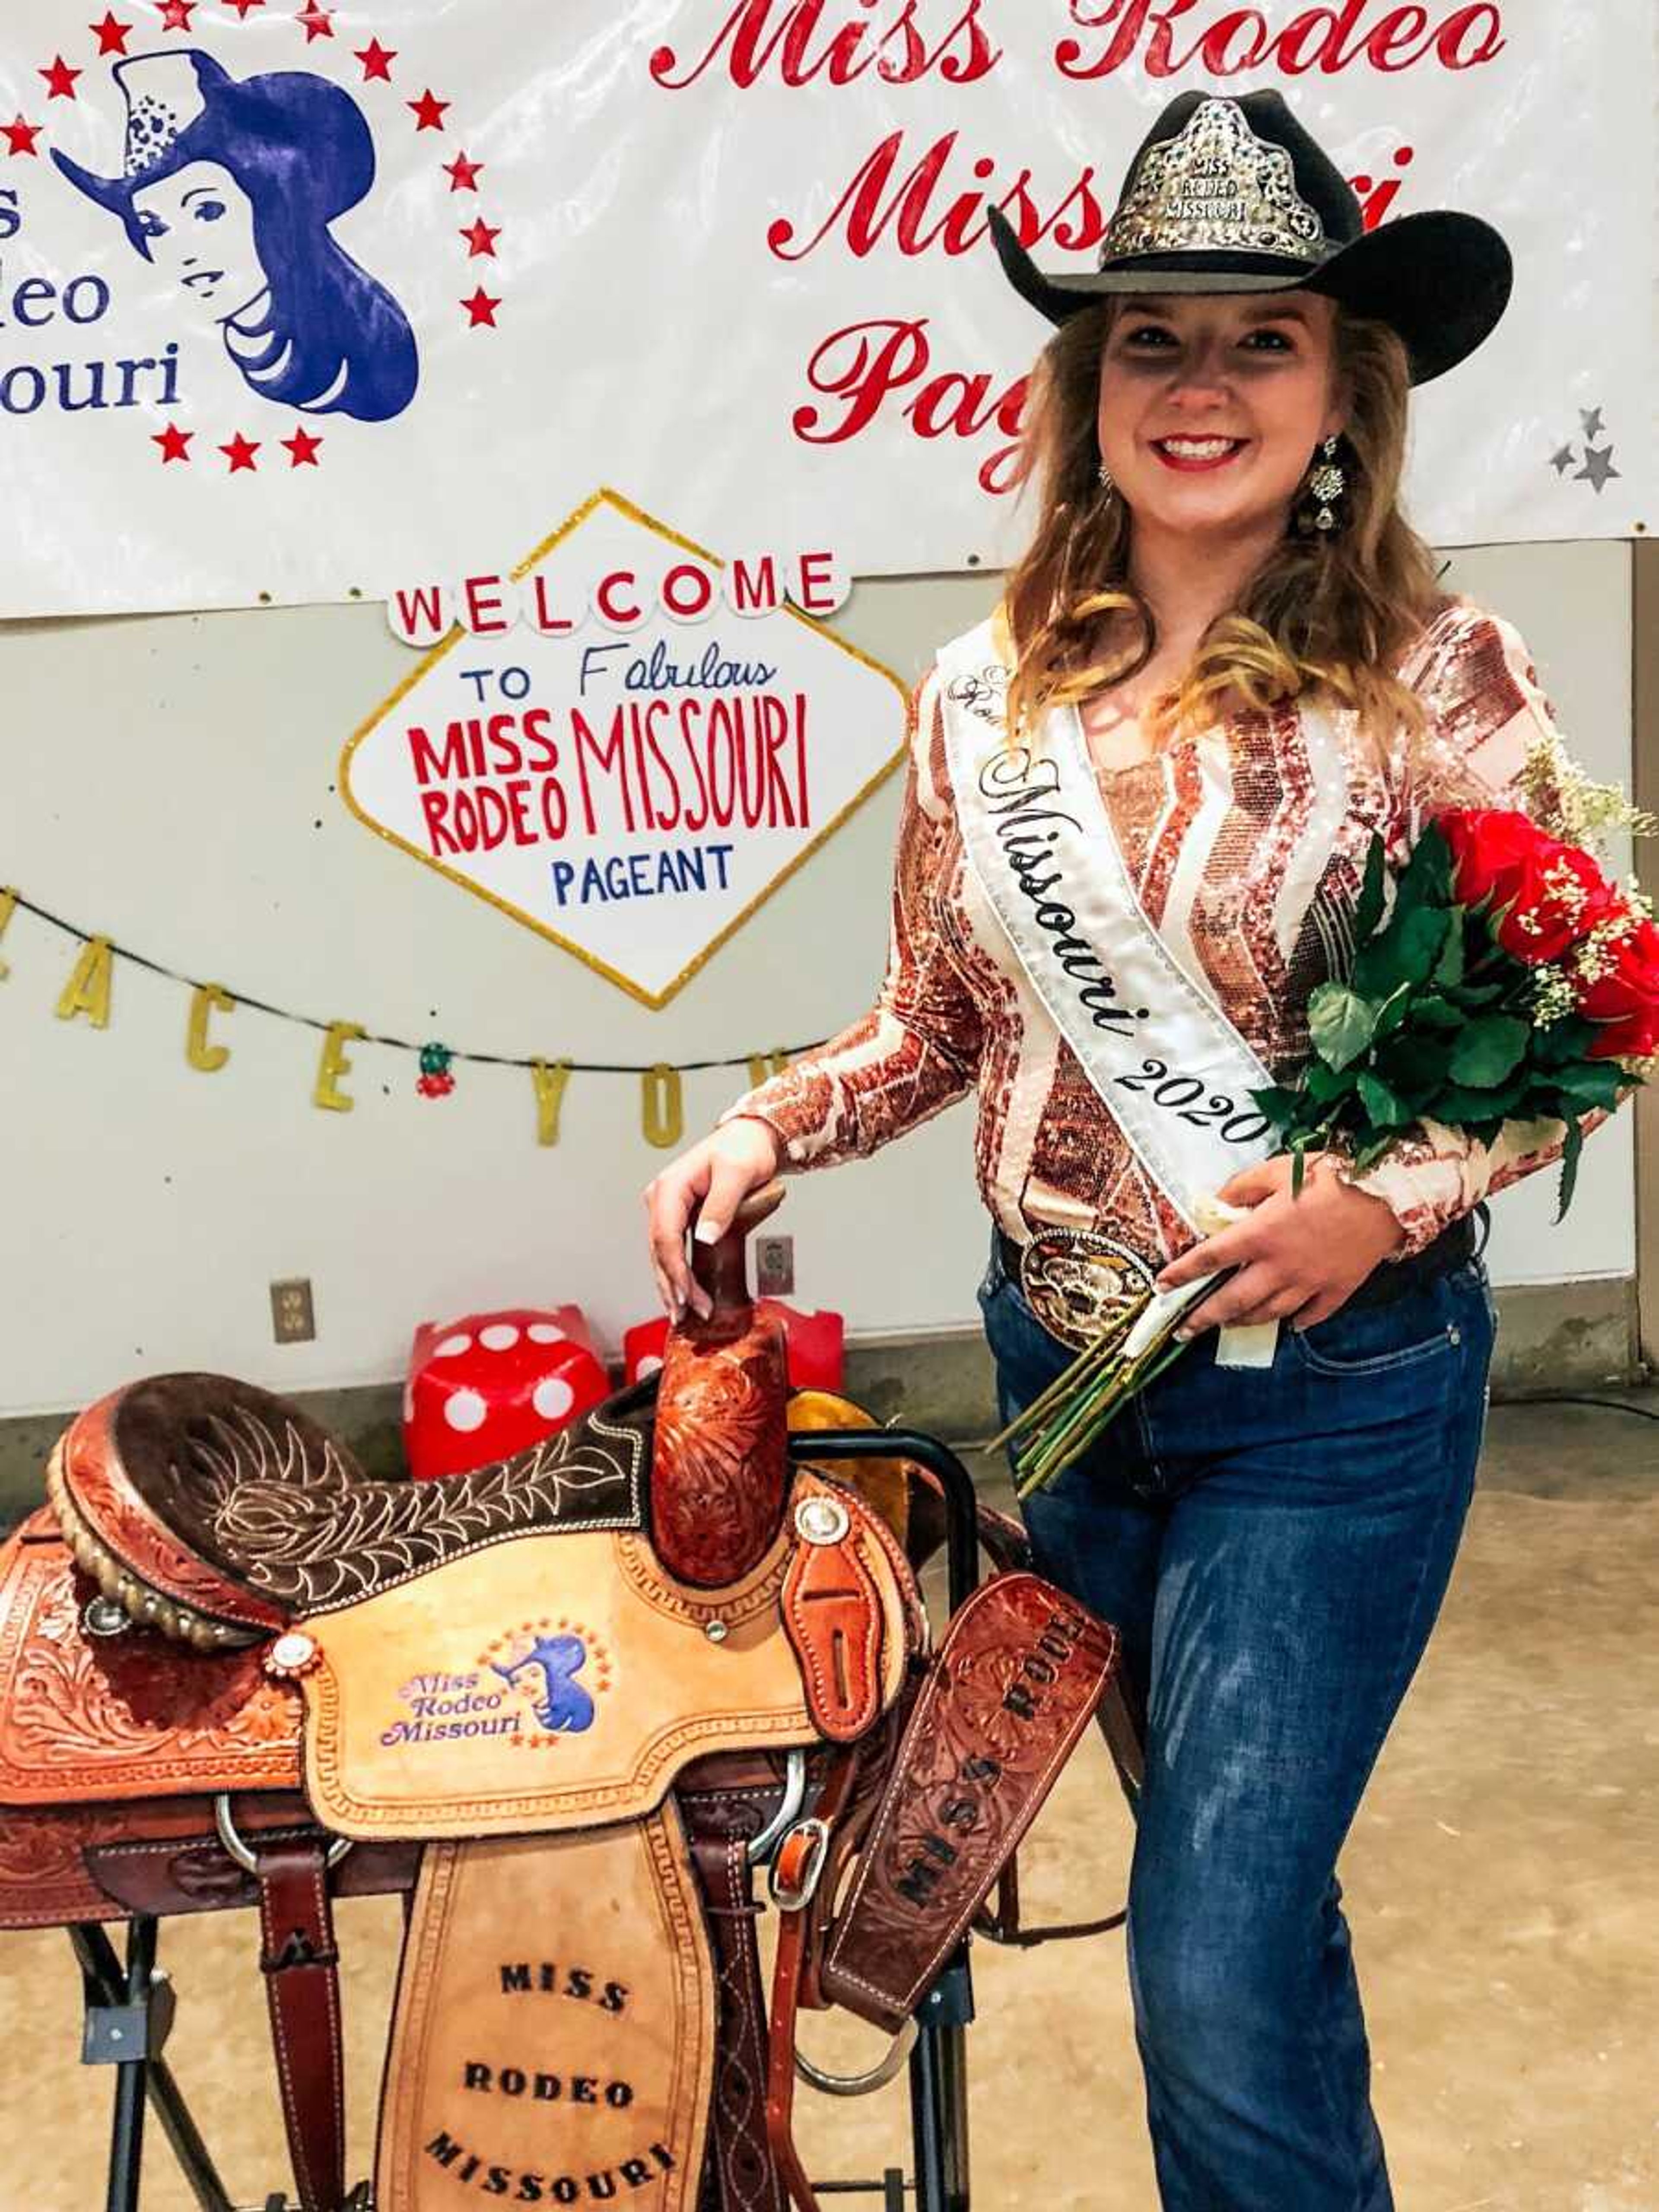 Southeast student Rebecca Heppe was named the 2020 Miss Rodeo Missouri at the pageant held late September.